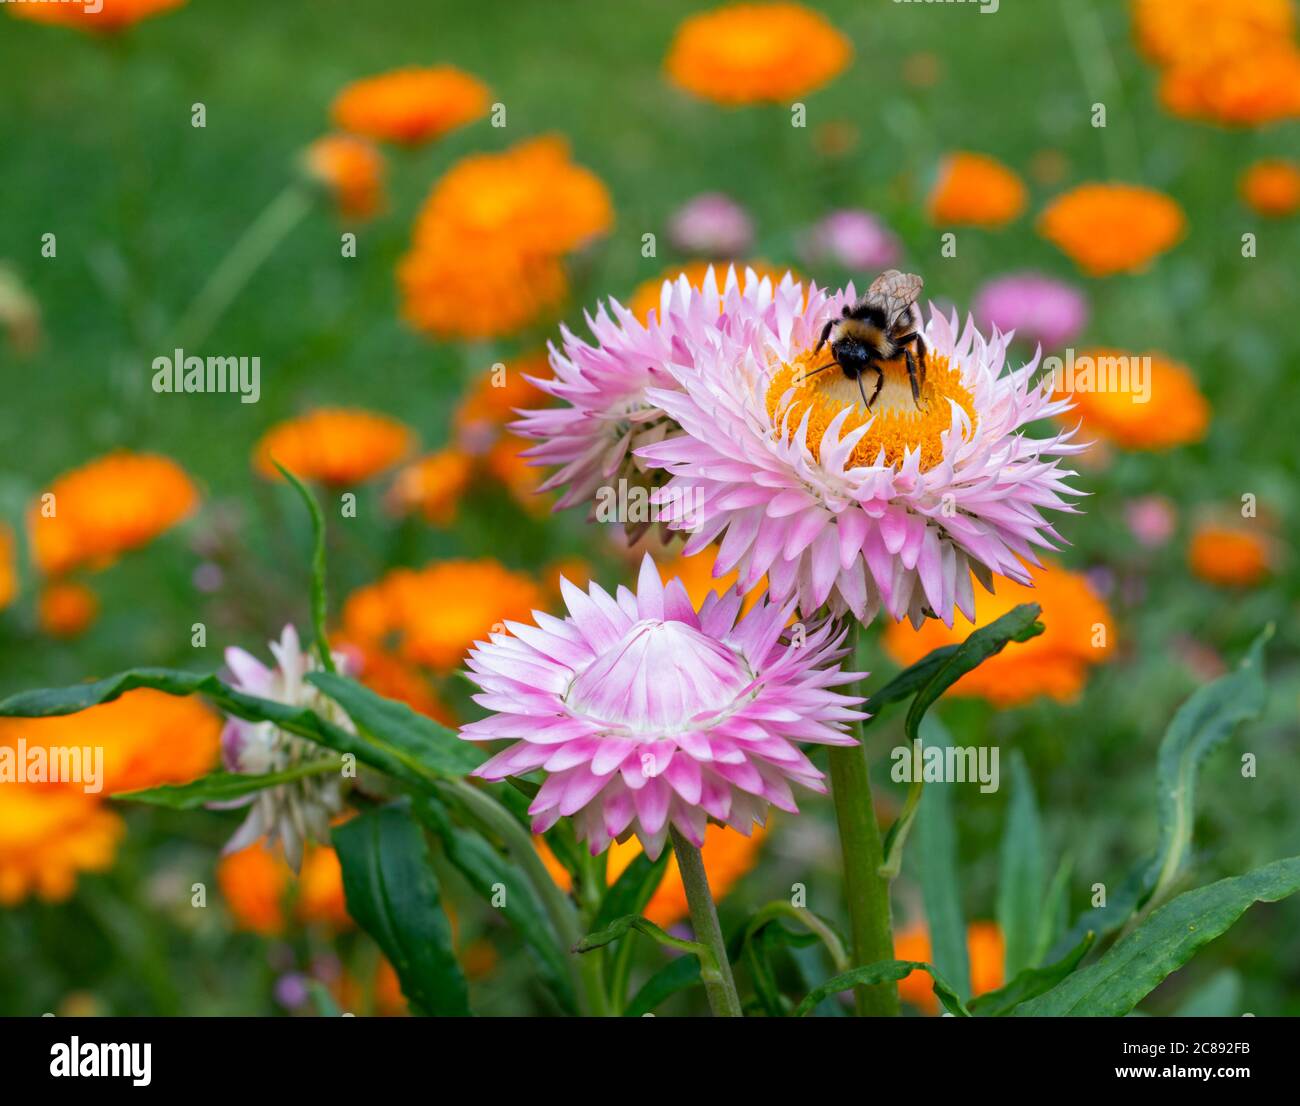 Helichrysum flowers in a garden with a bee gathering pollen Stock Photo